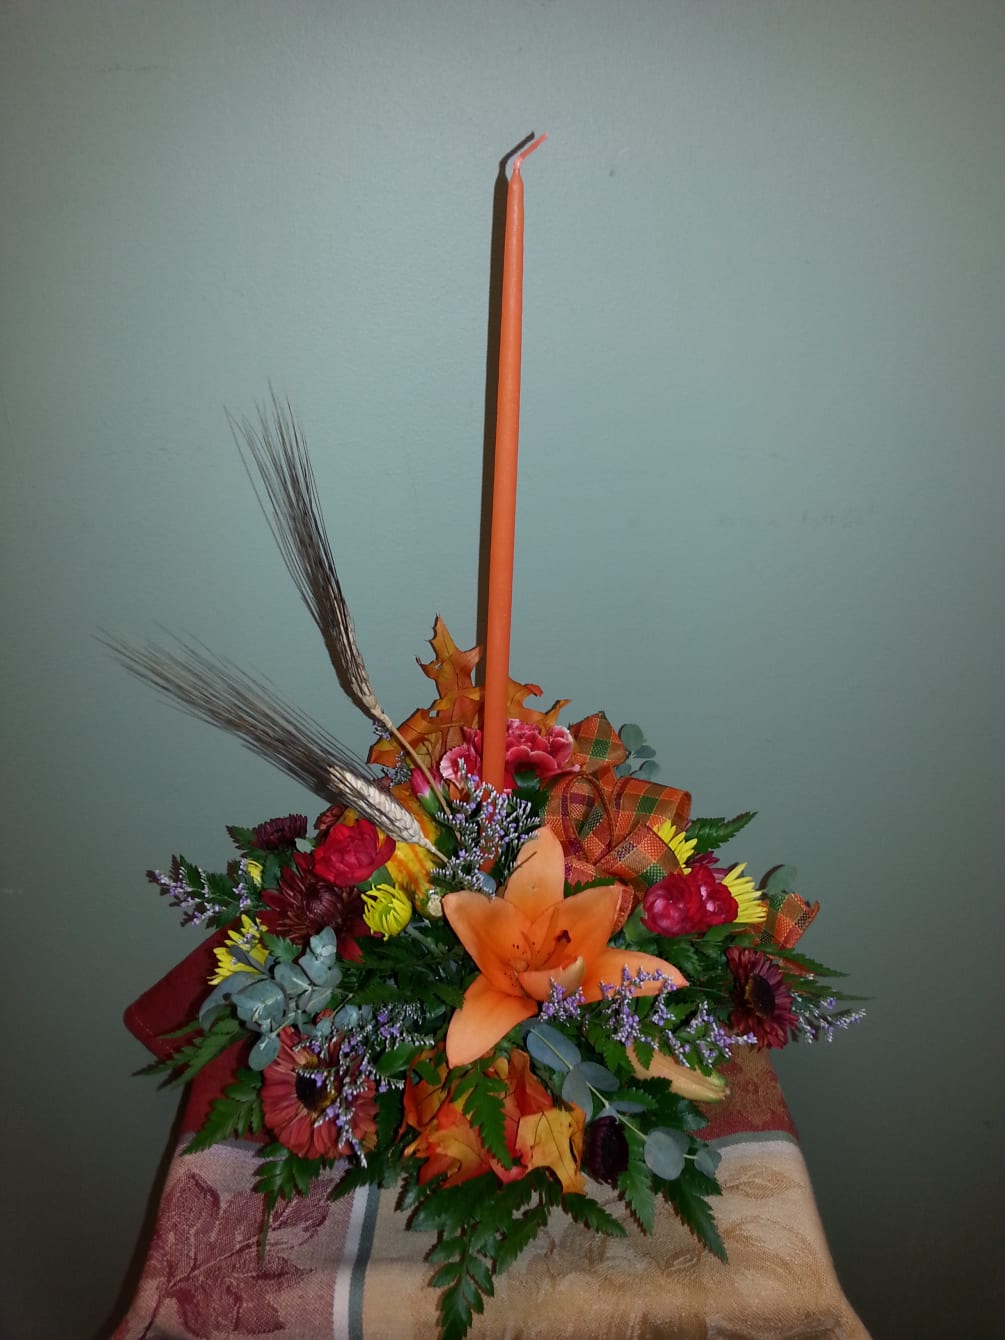 A tasteful Candle centerpiece of Lilies, Mums, Carnations and festive trim to